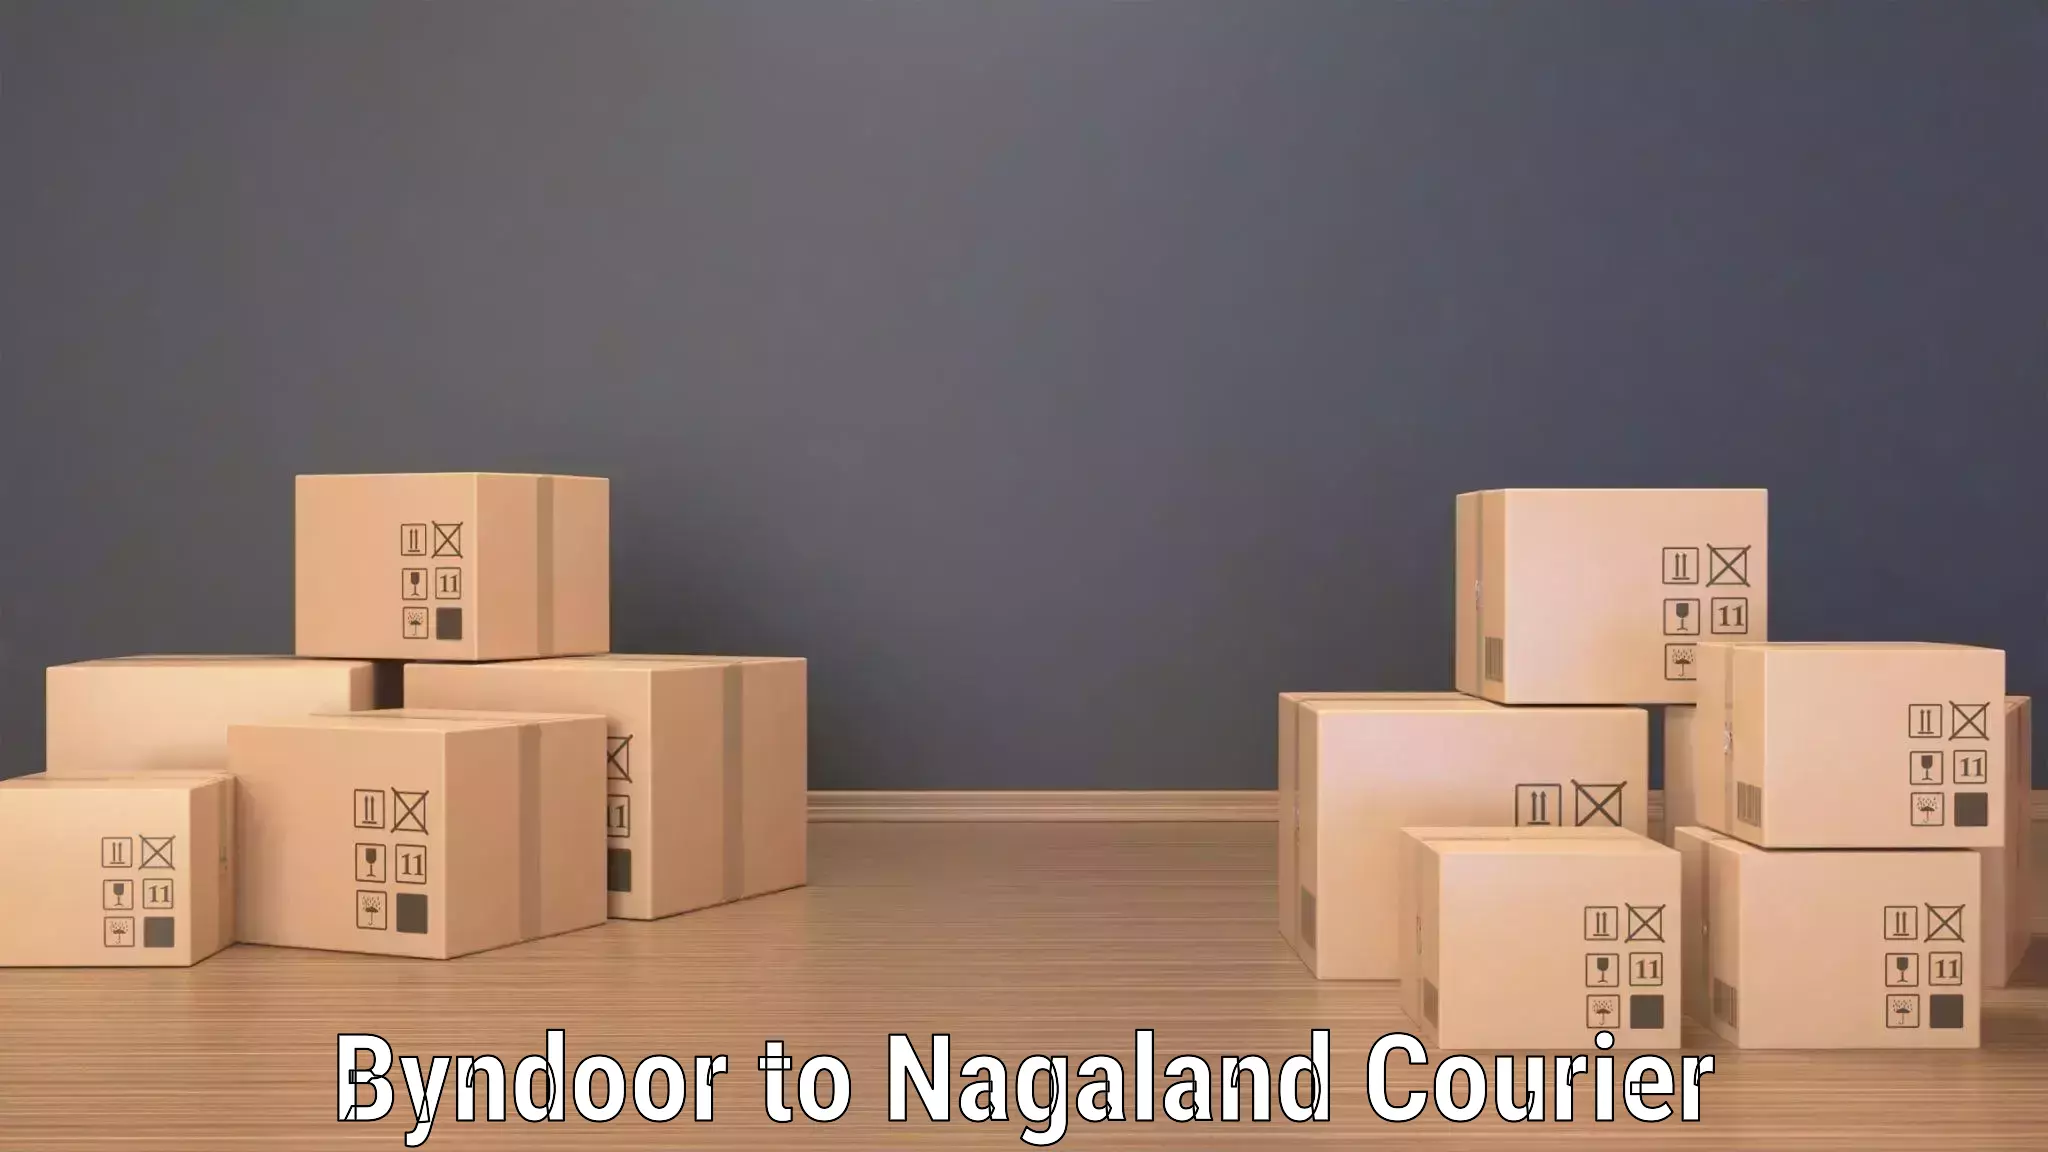 Nationwide parcel services Byndoor to Nagaland